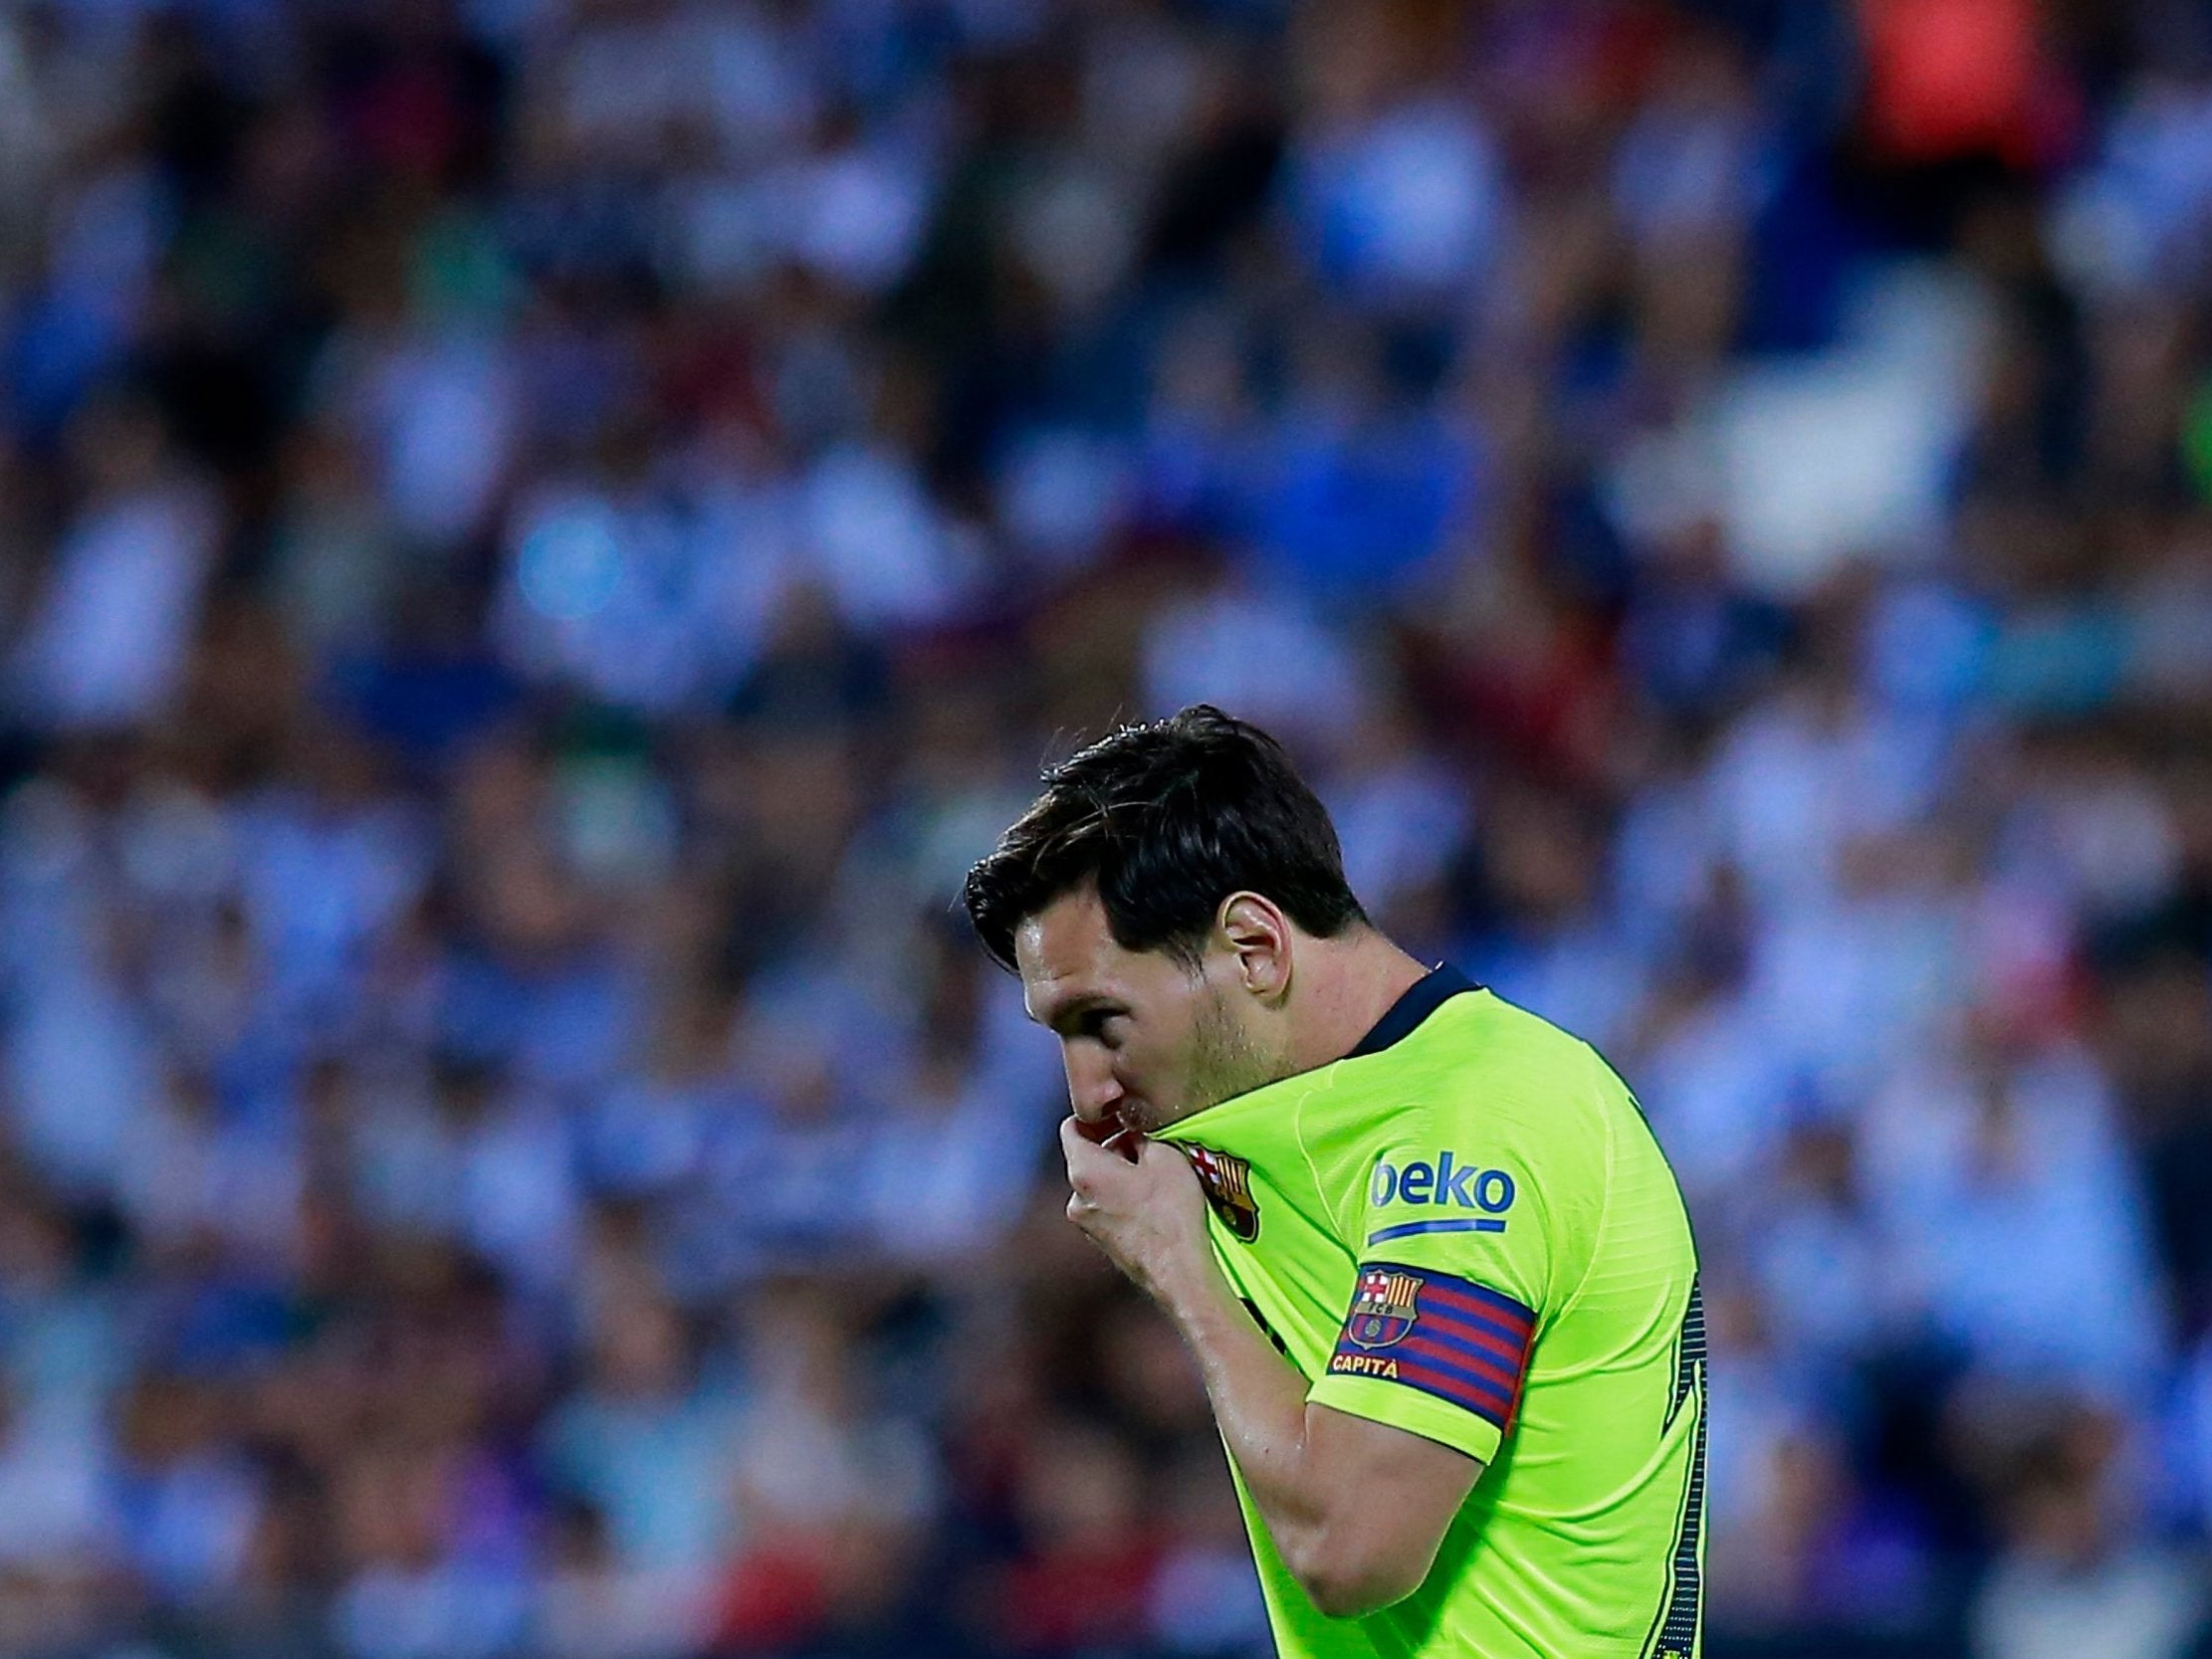 It was a disappointing night for Lionel Messi's team